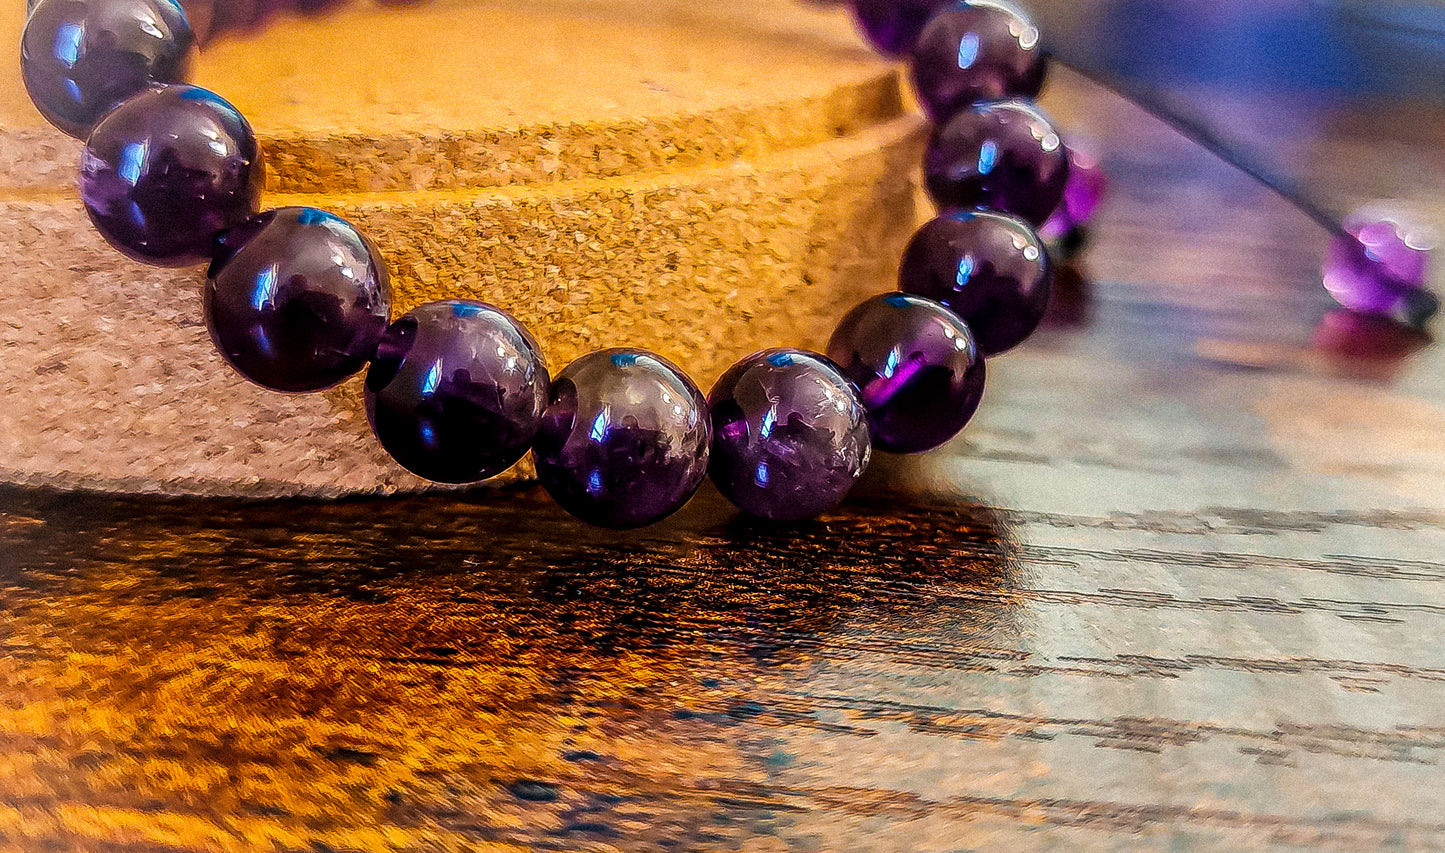 Natural Amethyst Bracelet for Healing & Positive Energy – The “Stone of Peace”